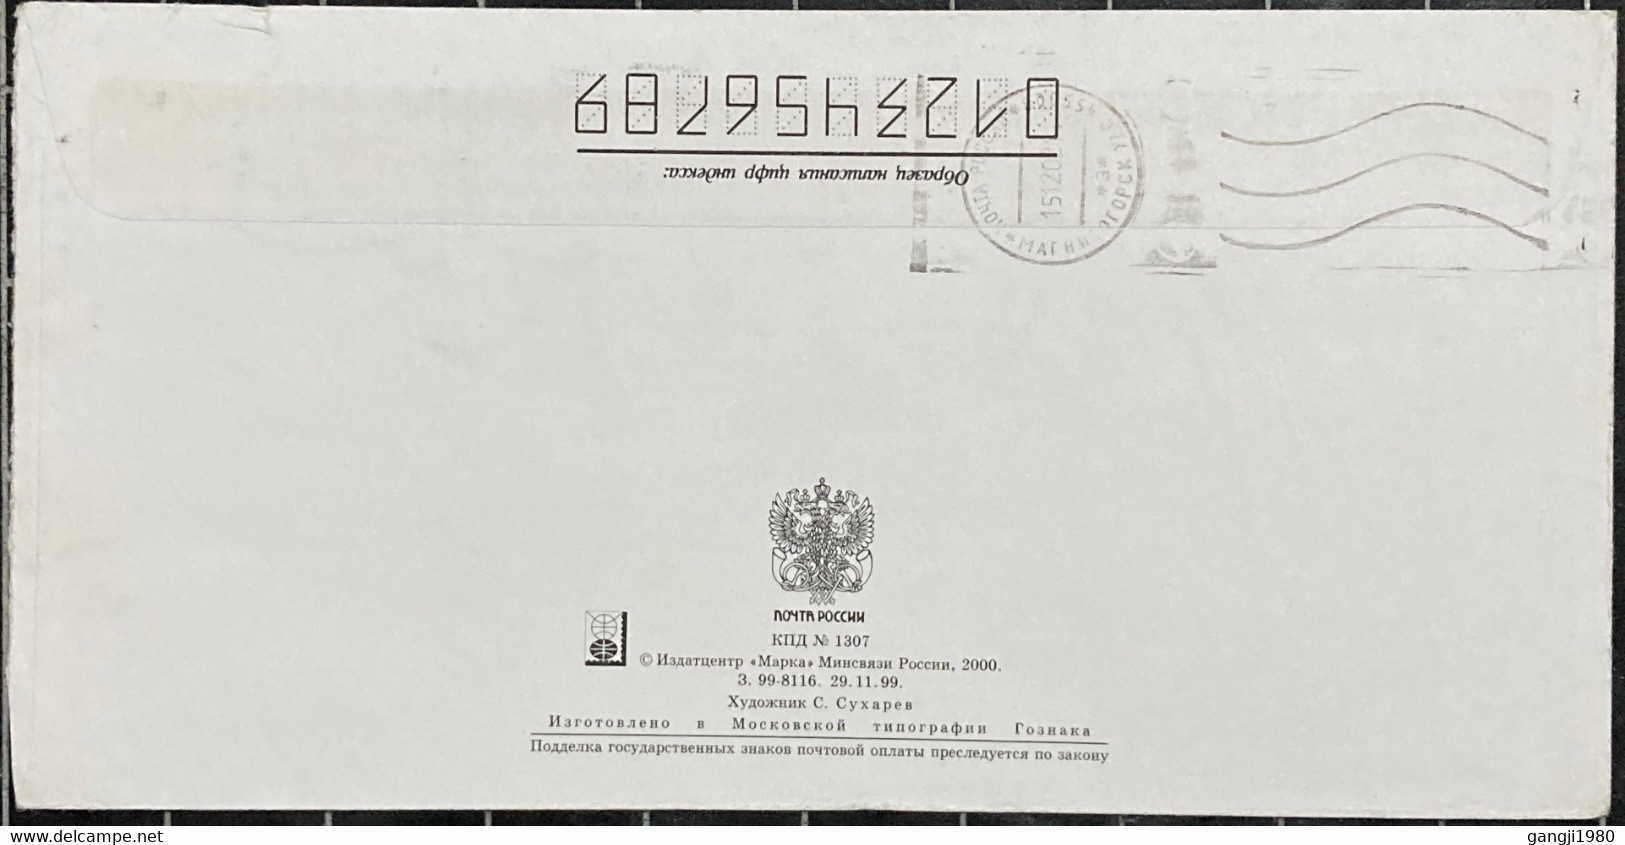 RUSSIA 2002, STATIONERY COVER USED TO GERMANY,RETURN TO SENDER LABEL,RAILWAY, BUILDING, MAGNITOGORSK TOWN CANCEL - Cartas & Documentos